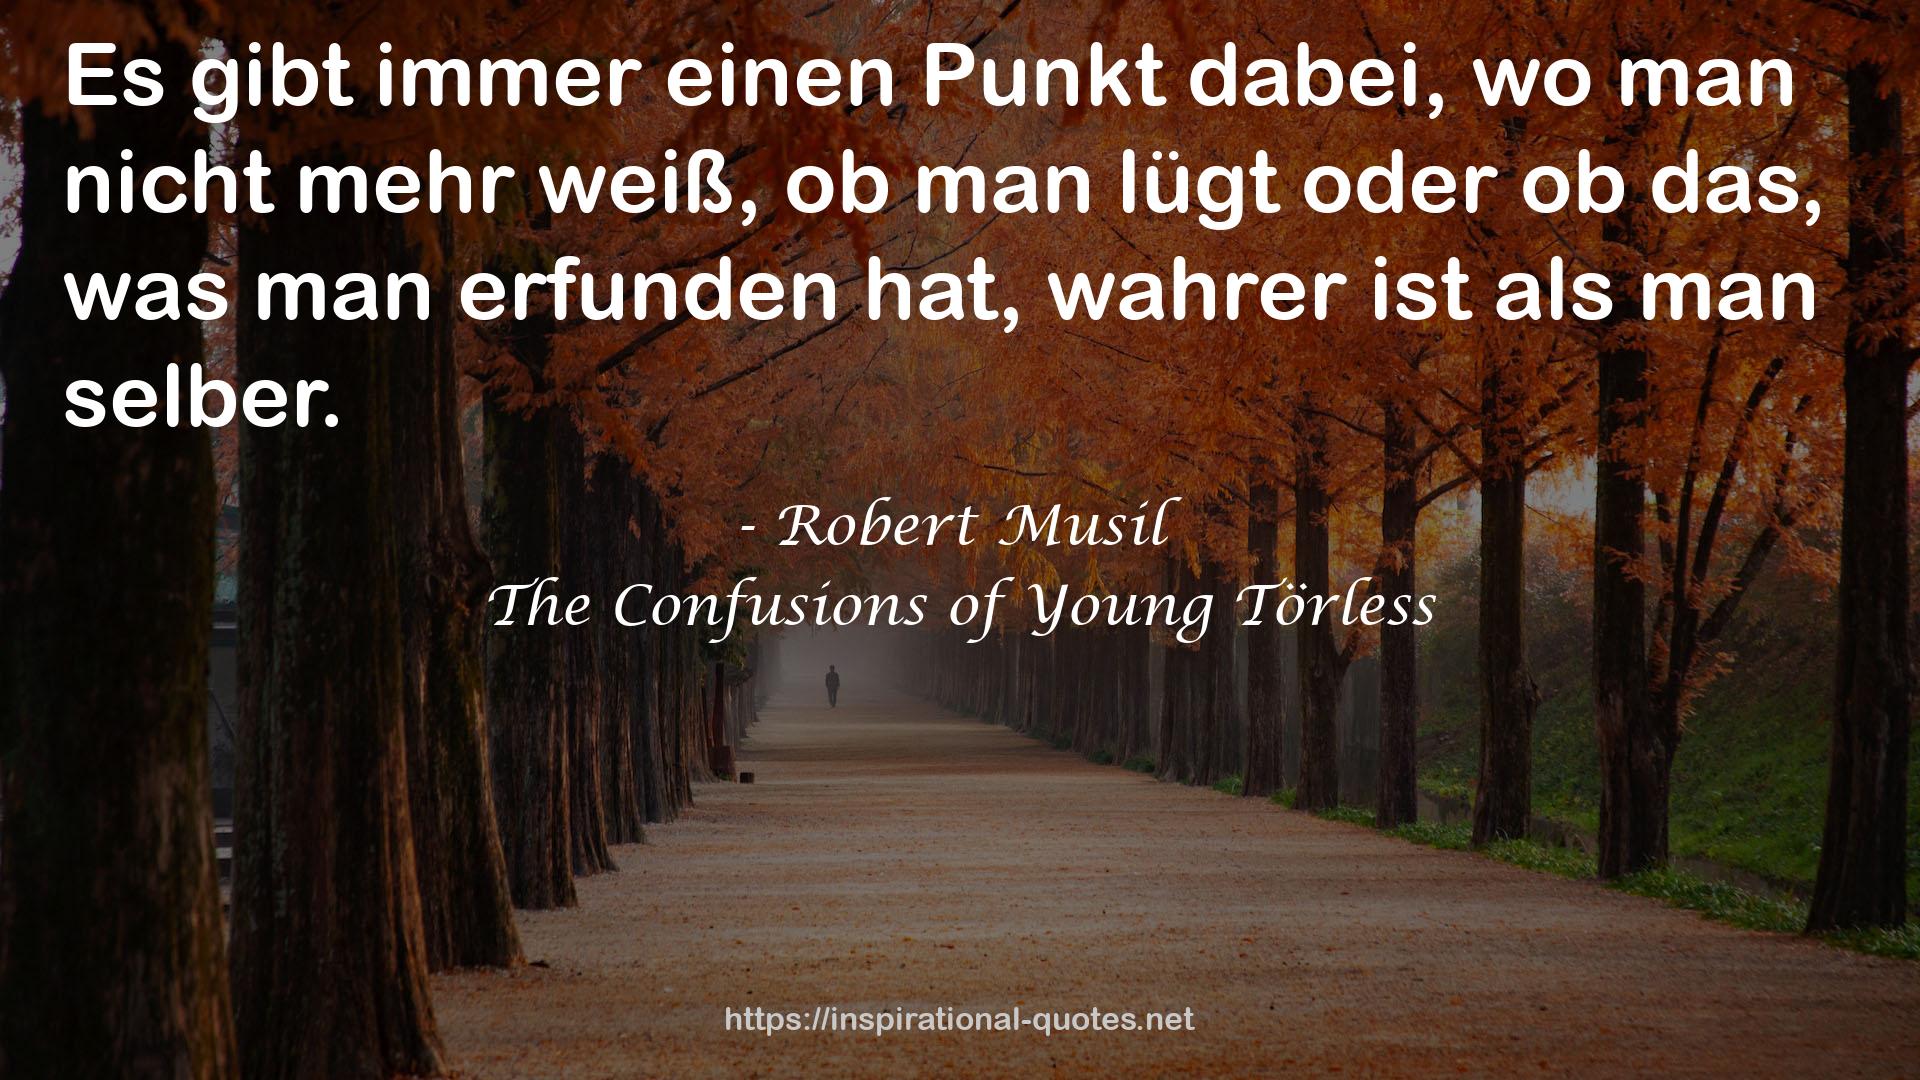 The Confusions of Young Törless QUOTES